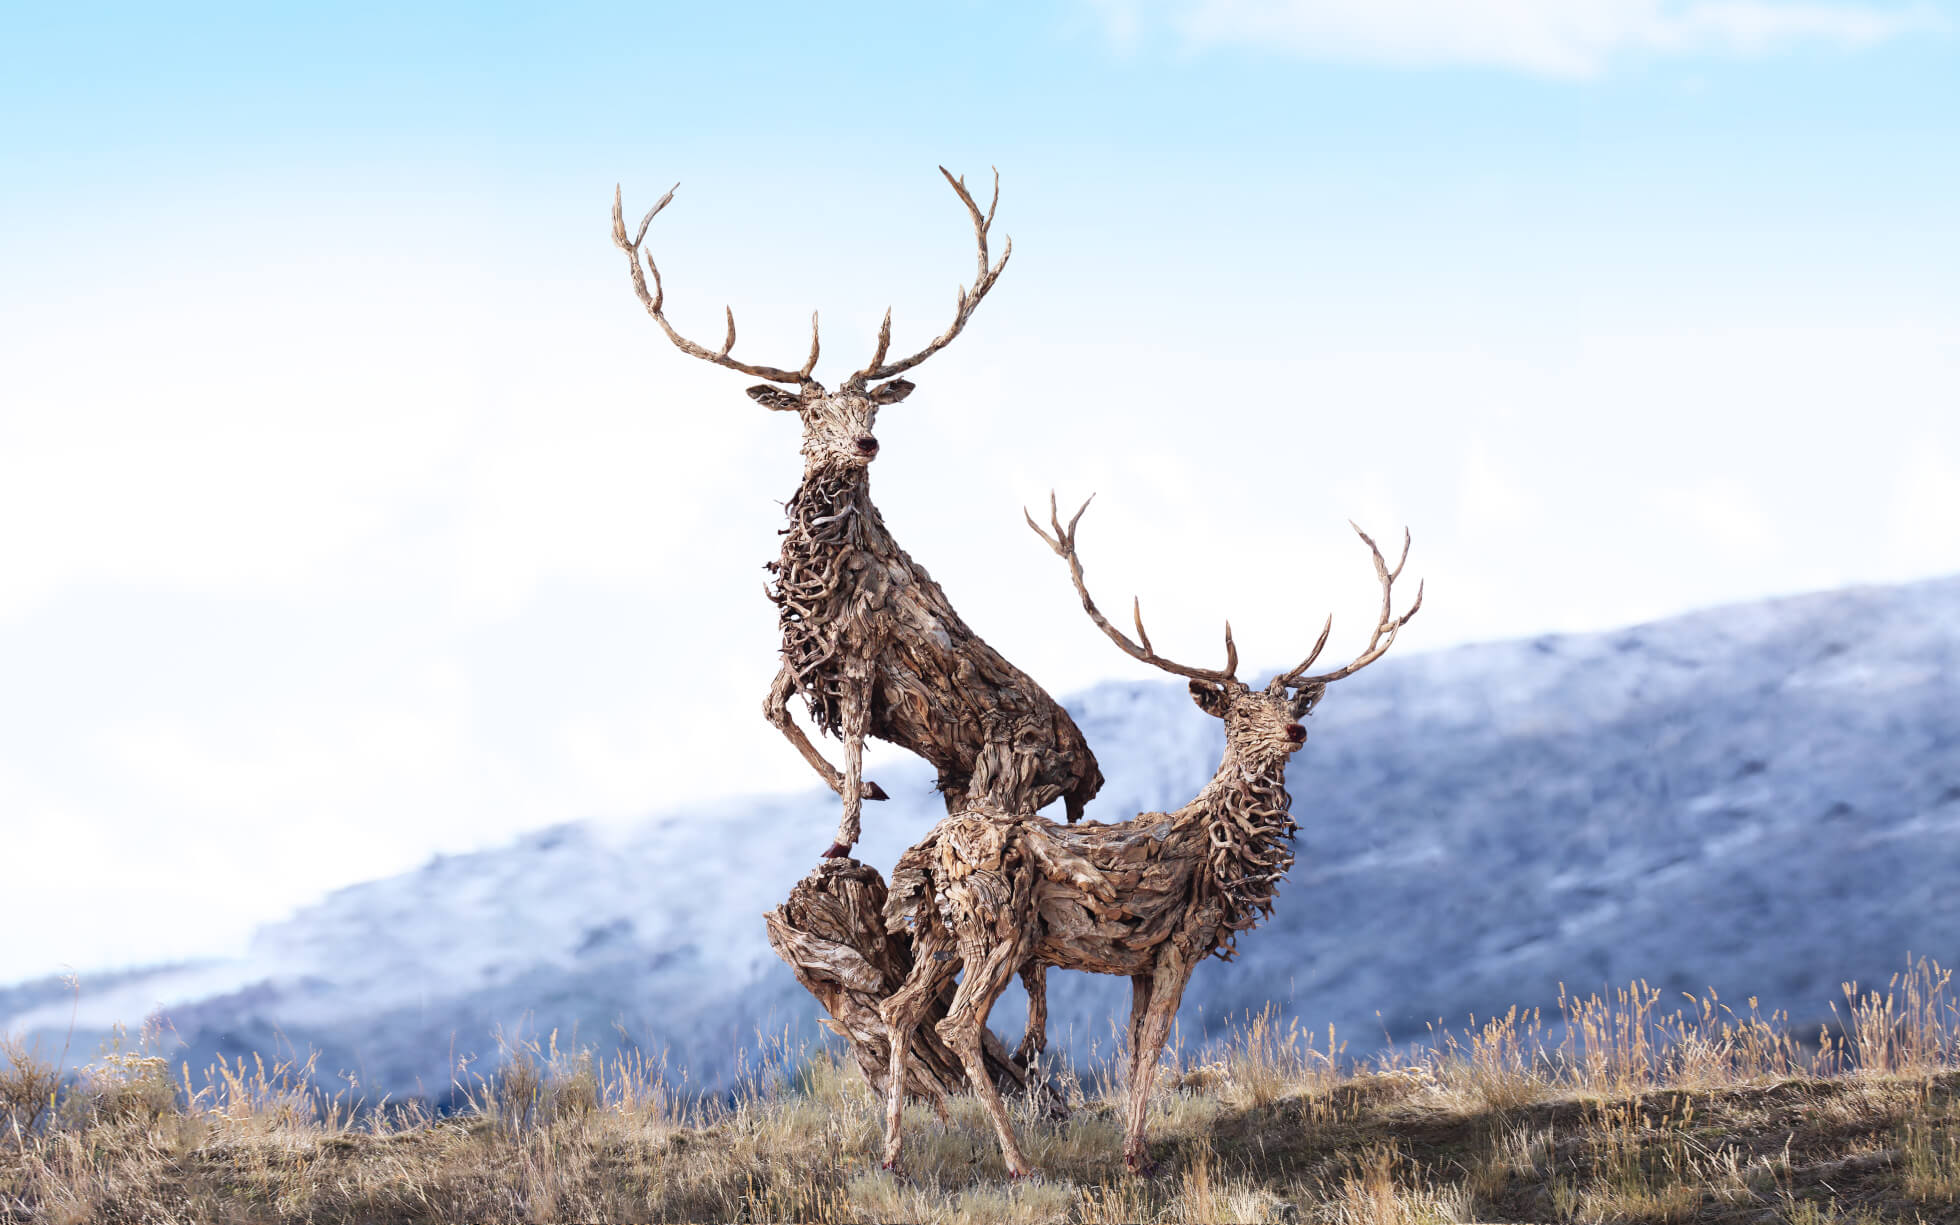 The Royal Stags